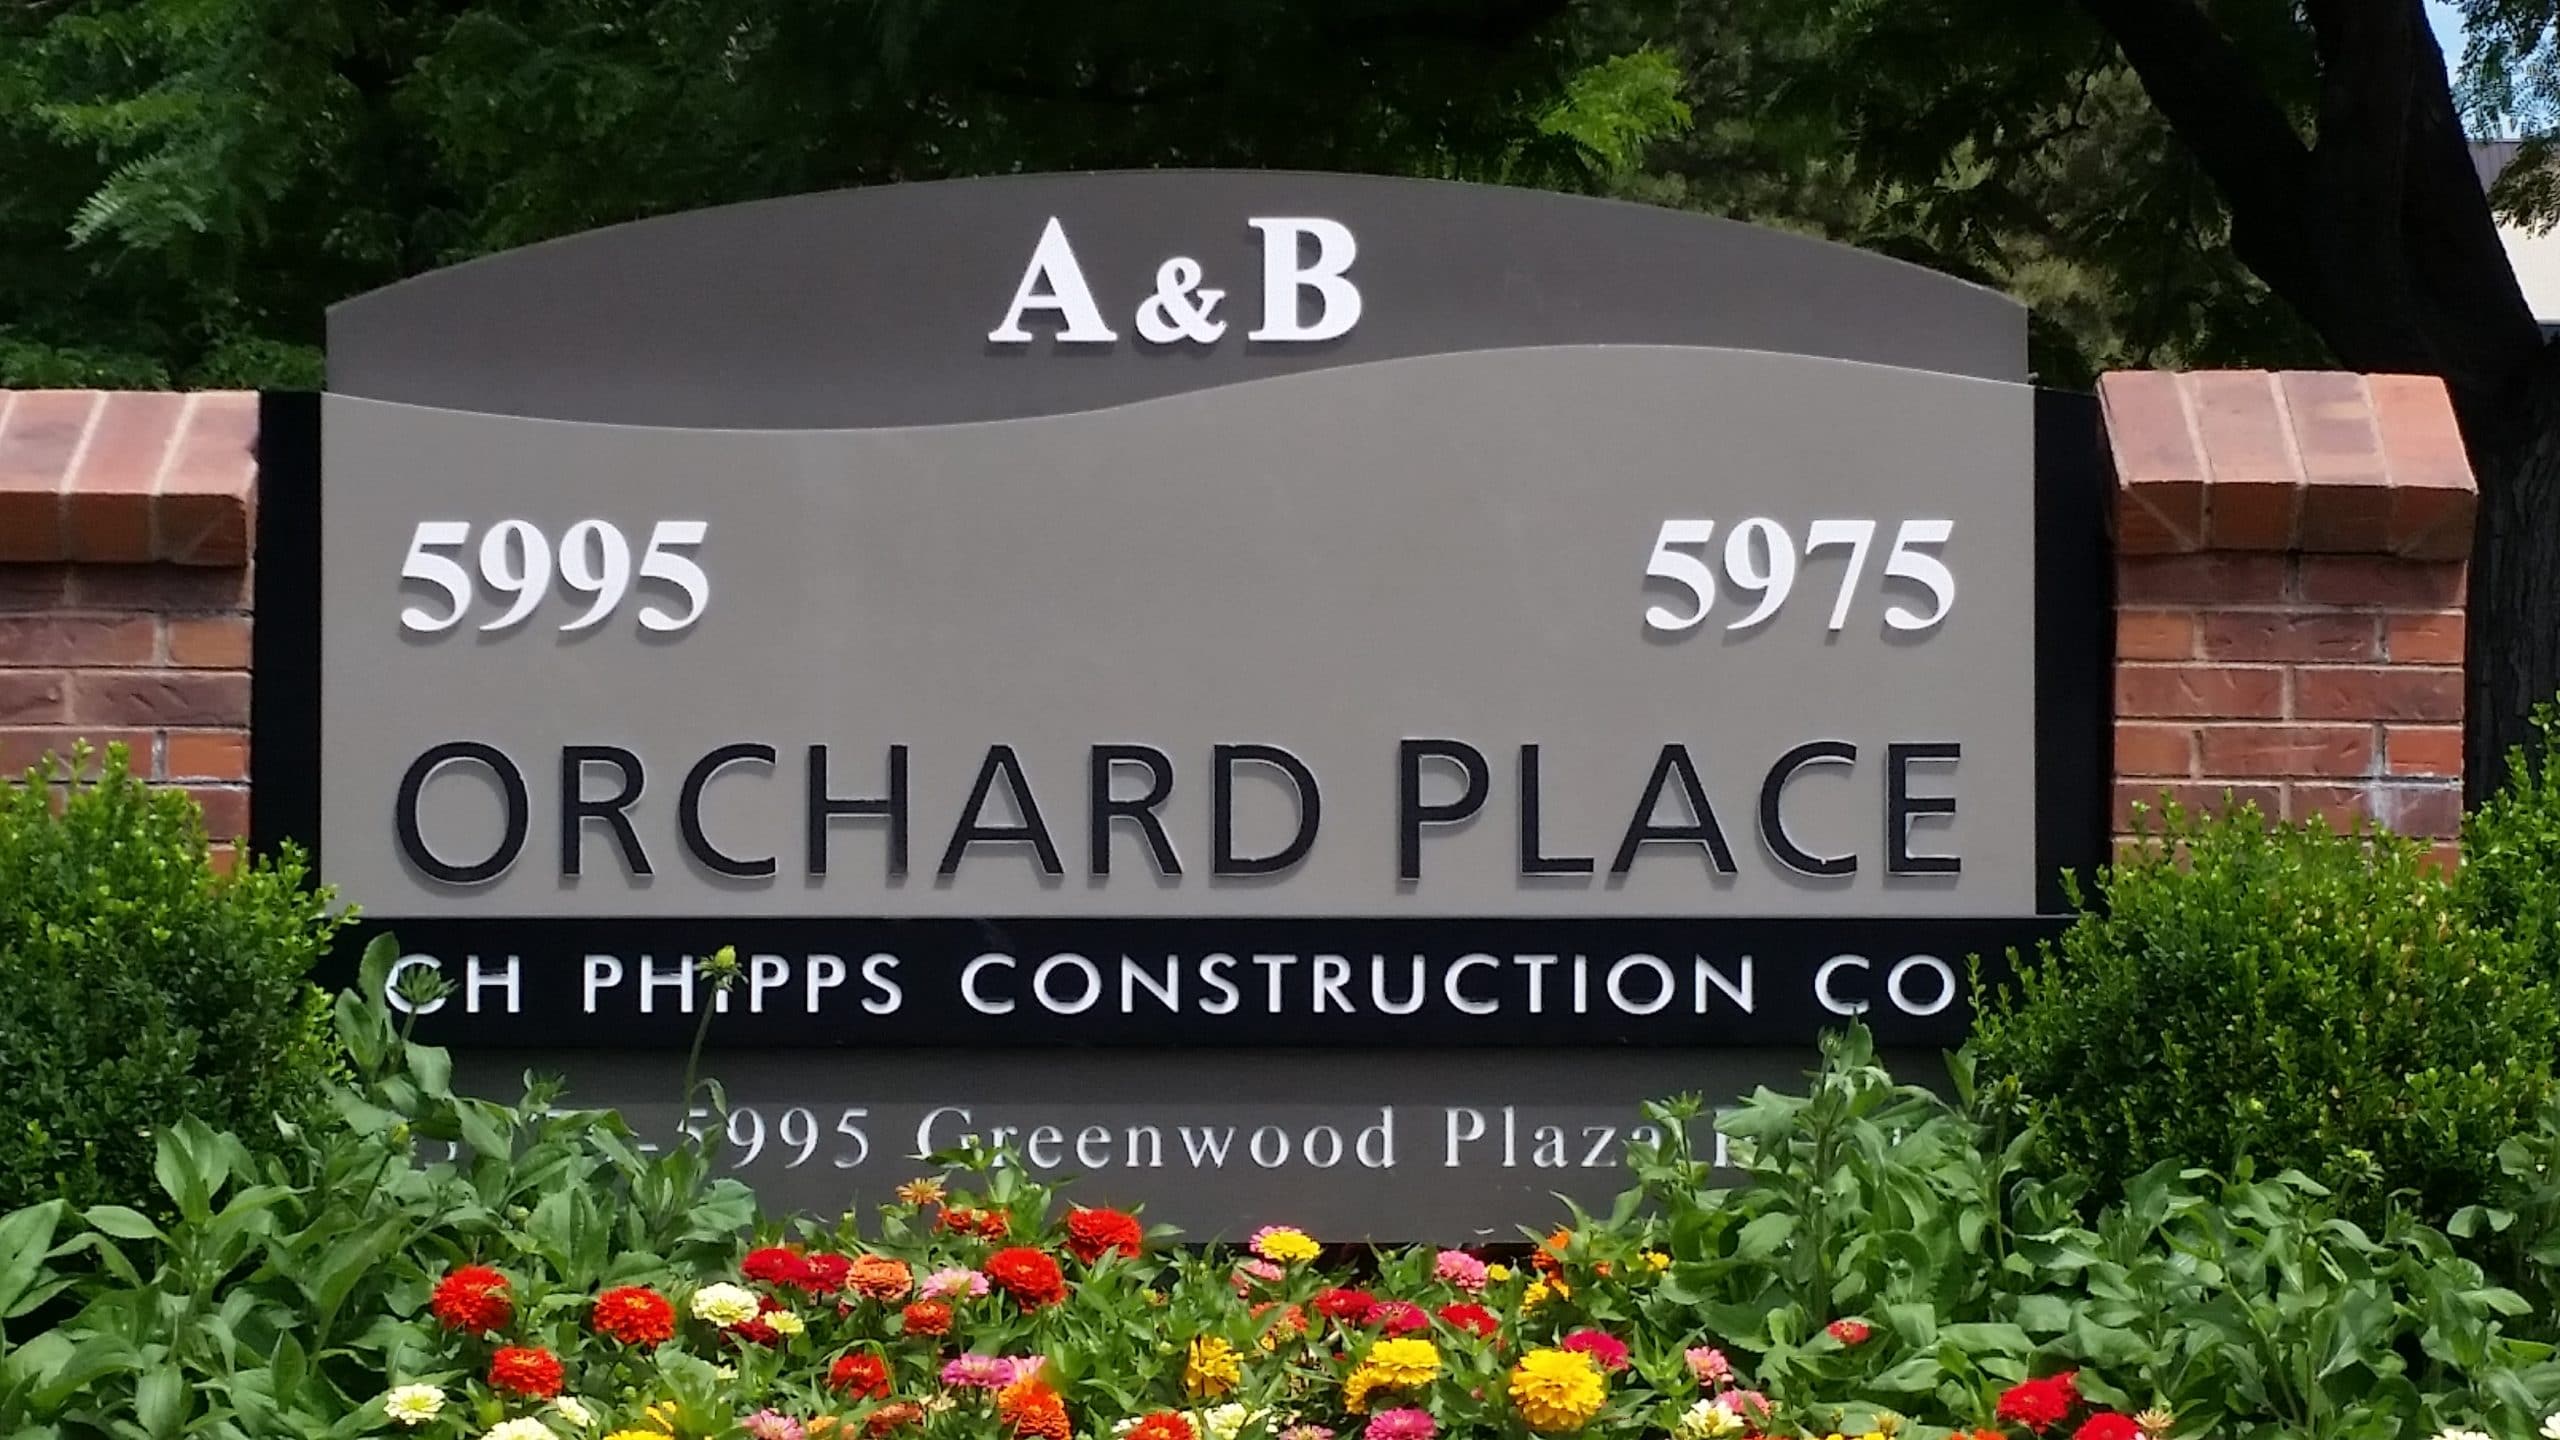 West Building Sign Greenwood Village 5995 Greenwood Plaza Blvd A and B Orchard Place Phipps Construction Company